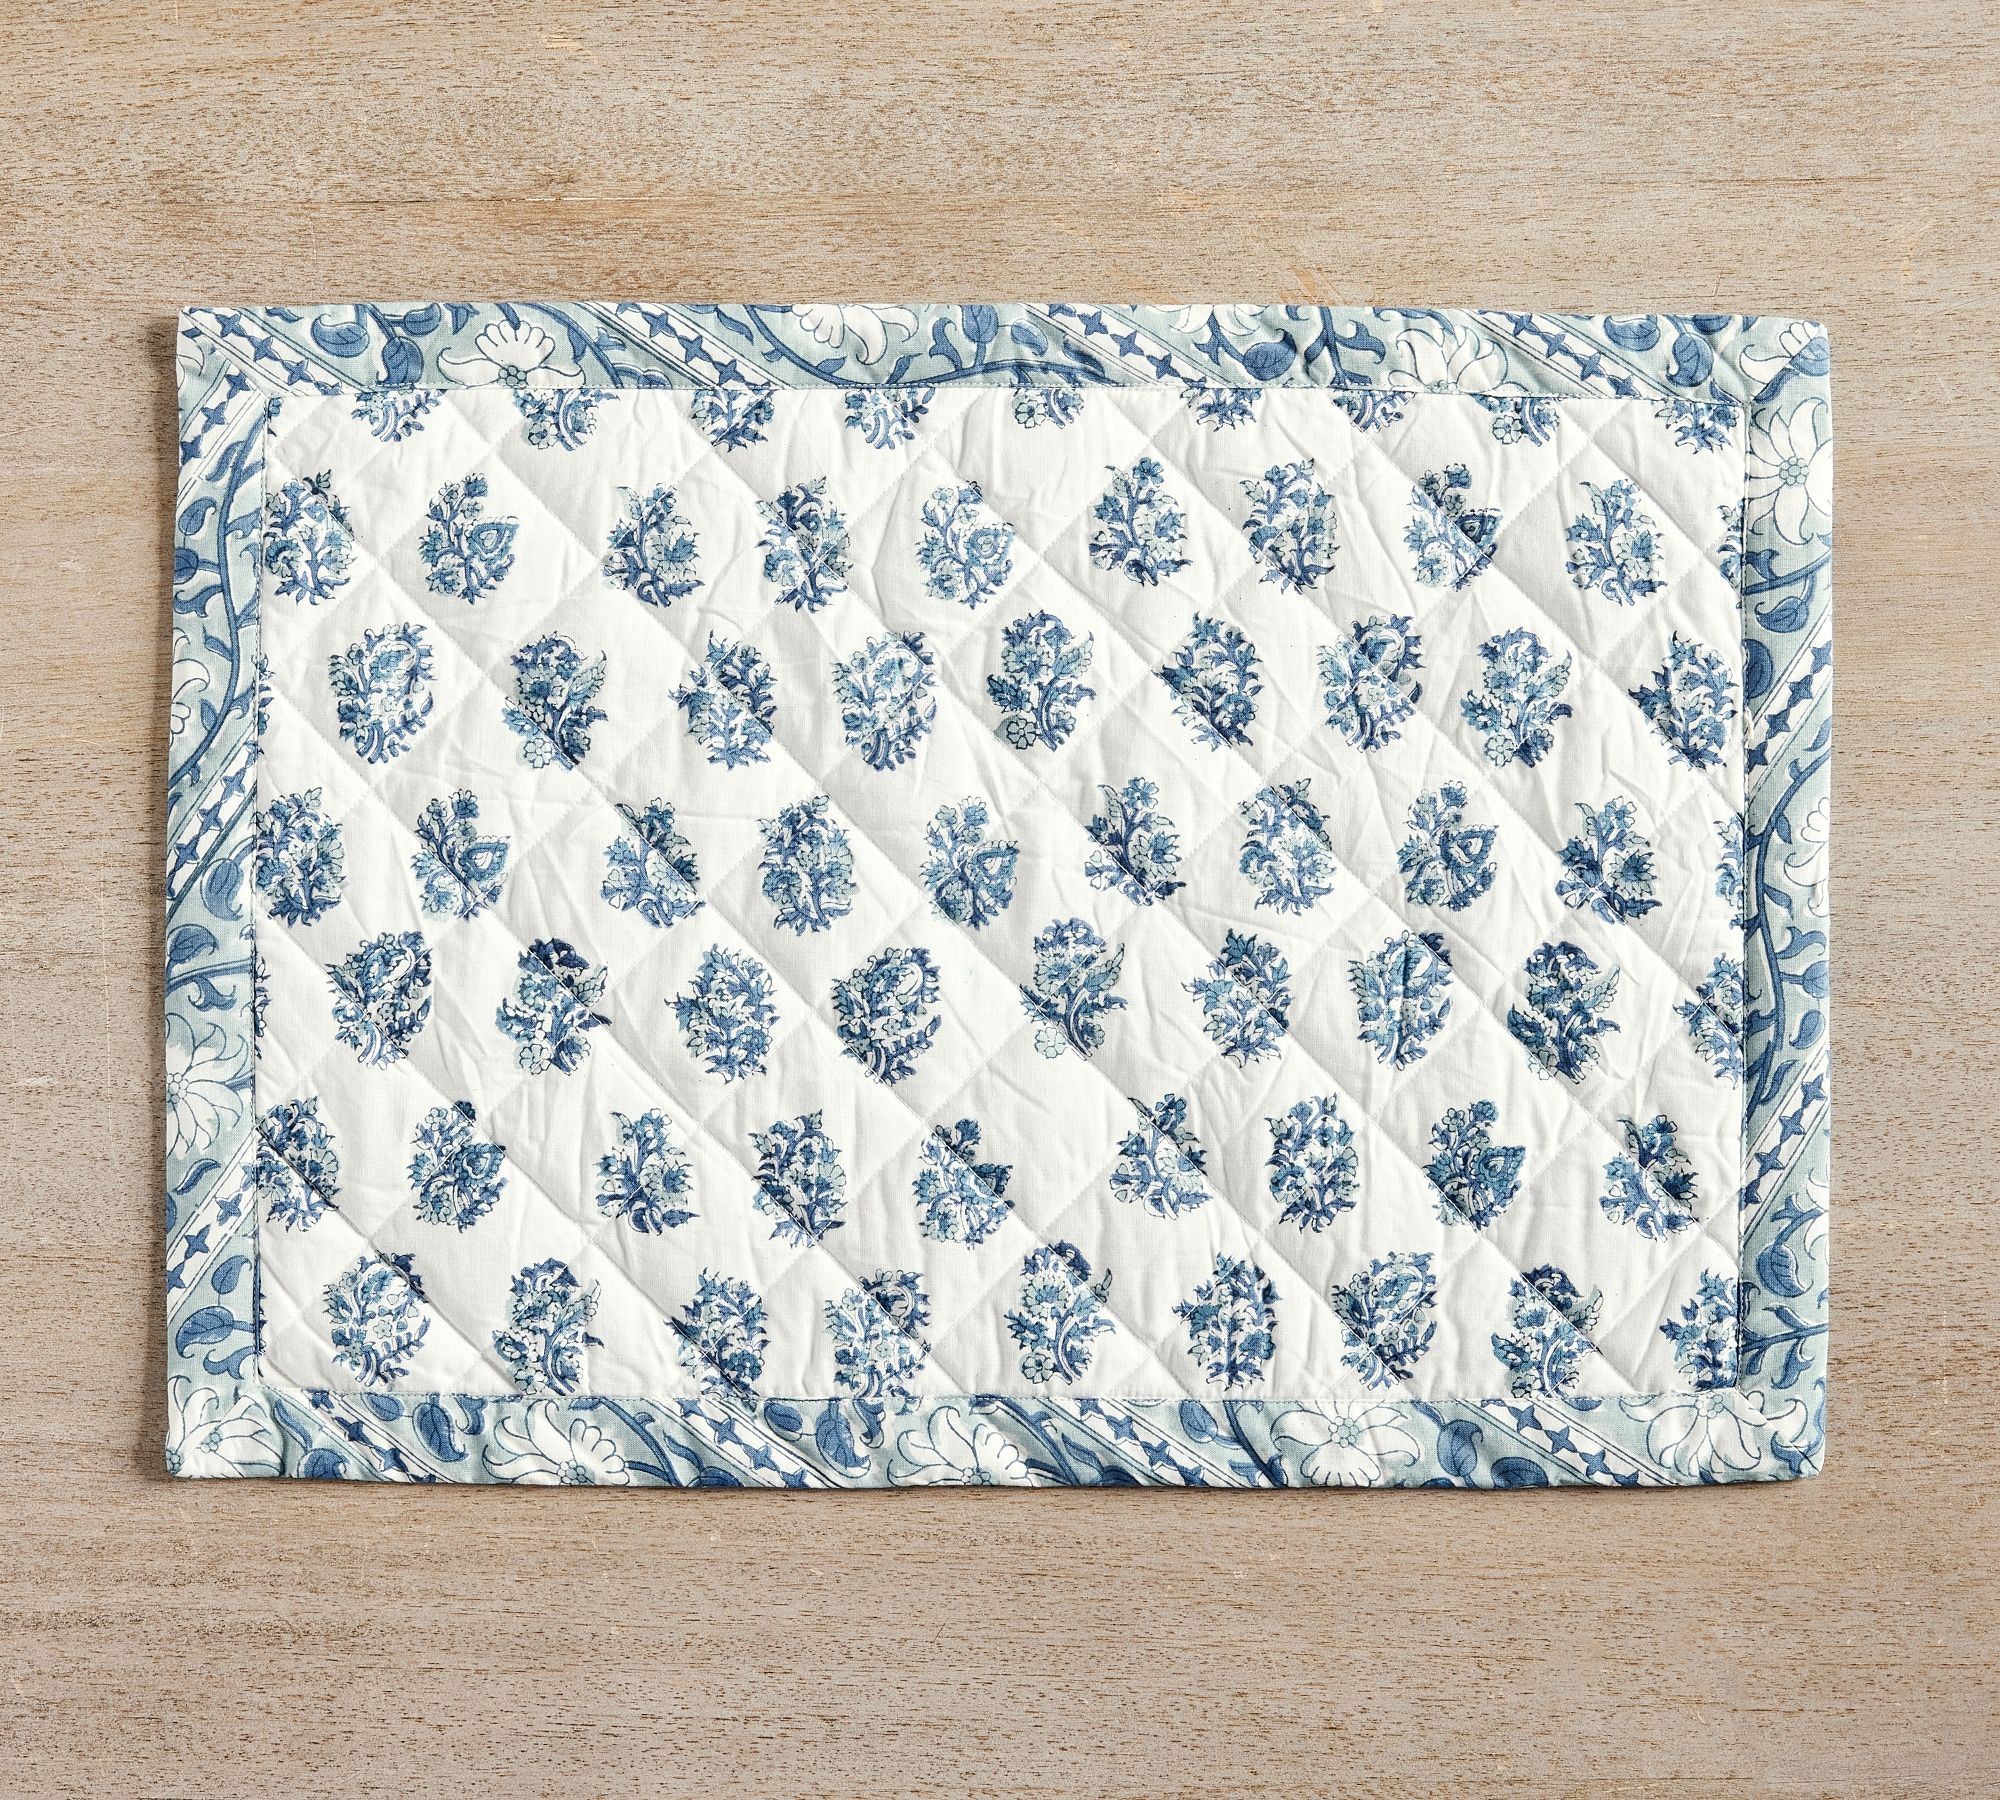 Sophia Block Print Quilted Placemats - Set of 4